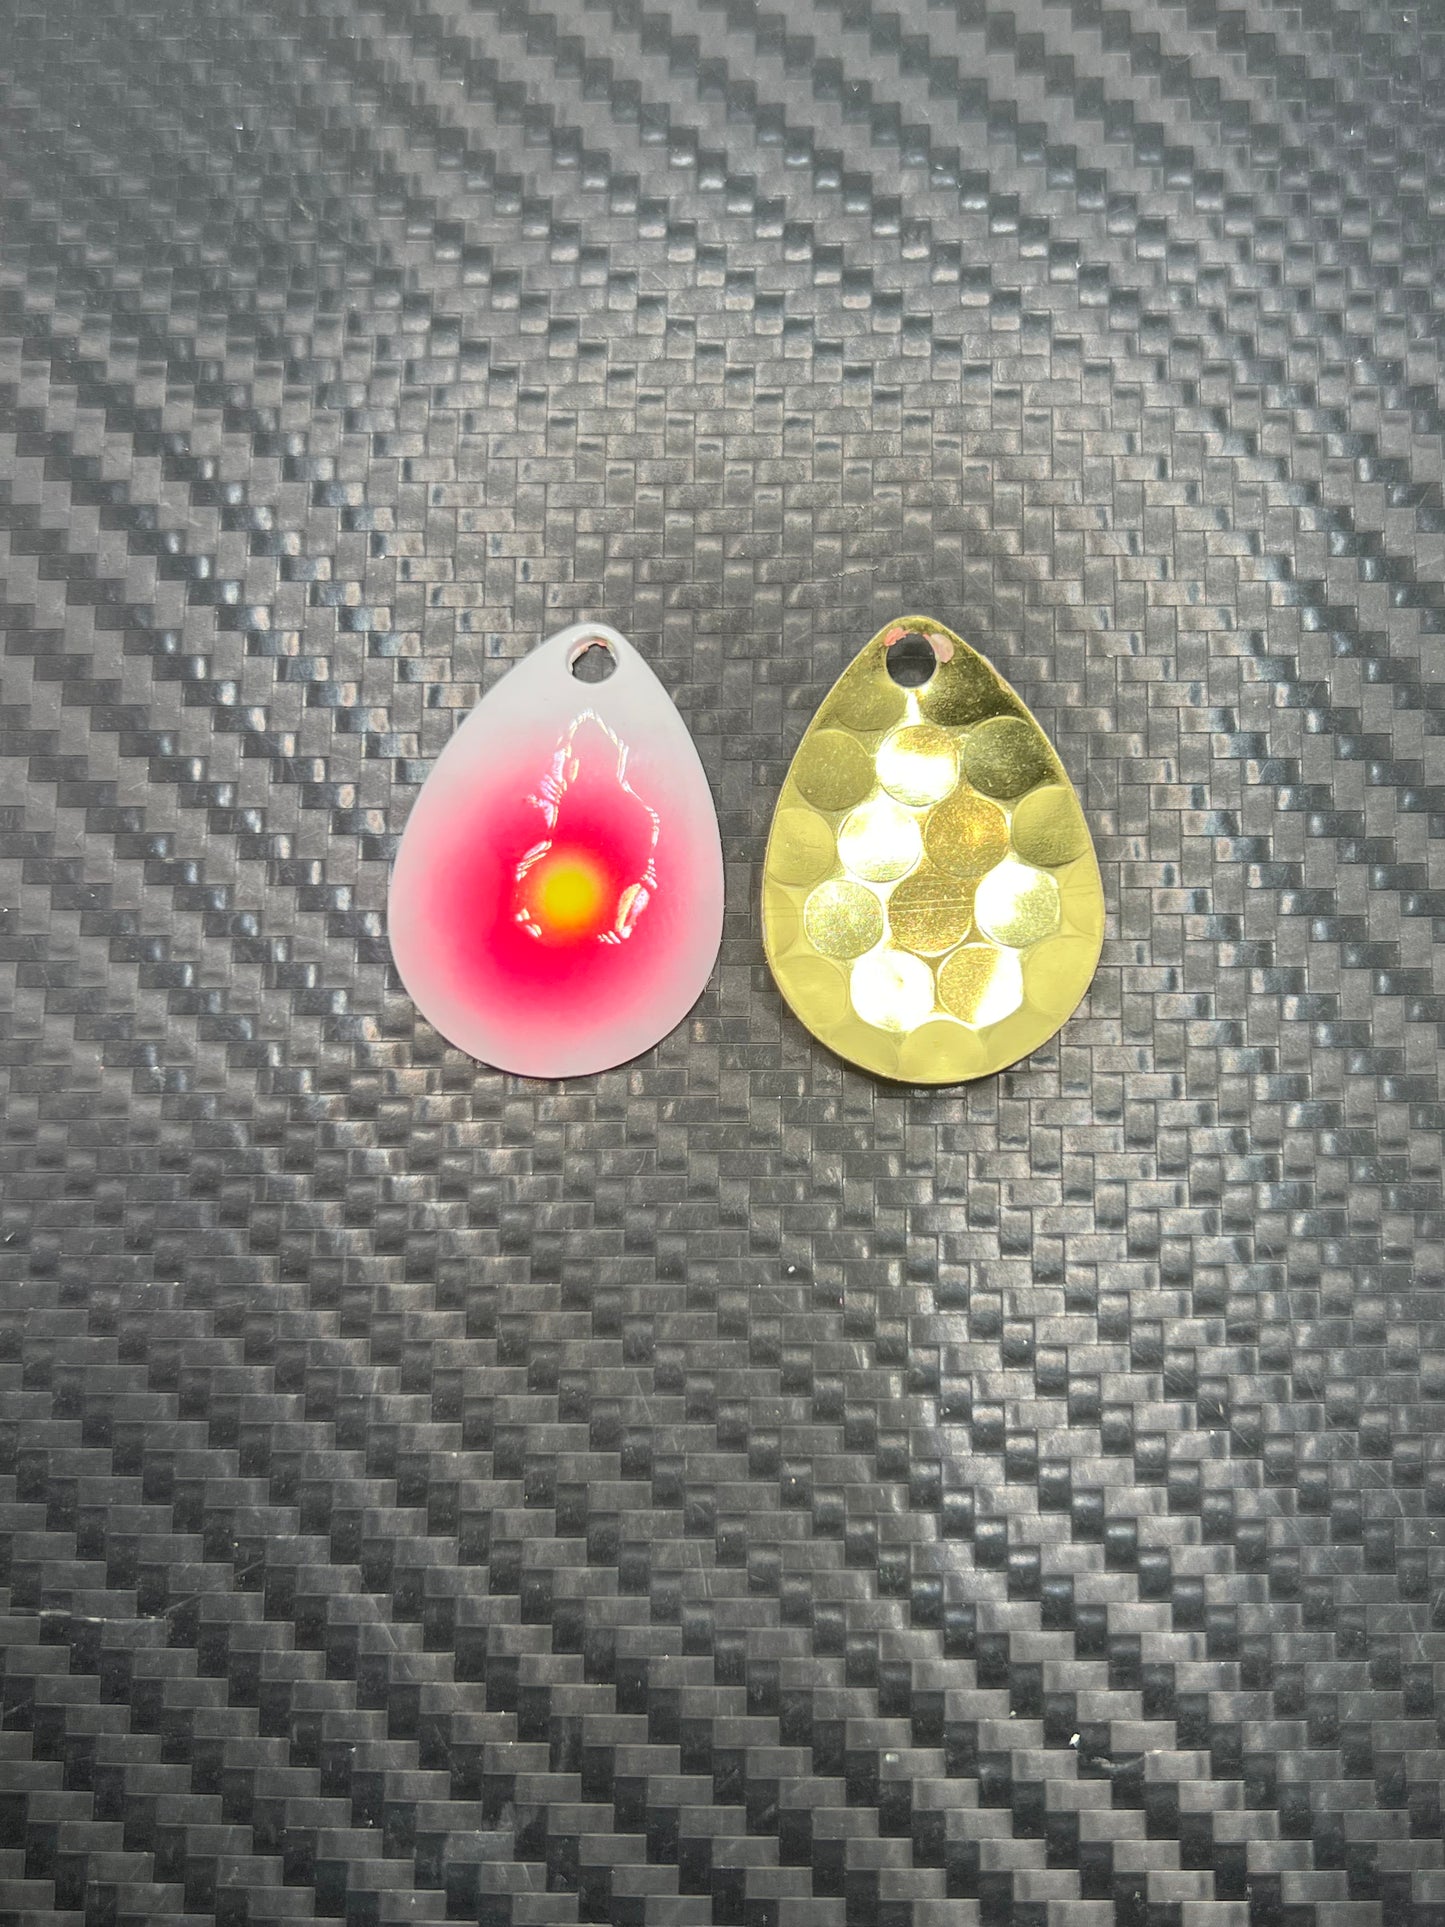 3.0 Hex Blade “Pink Areola” 2PK